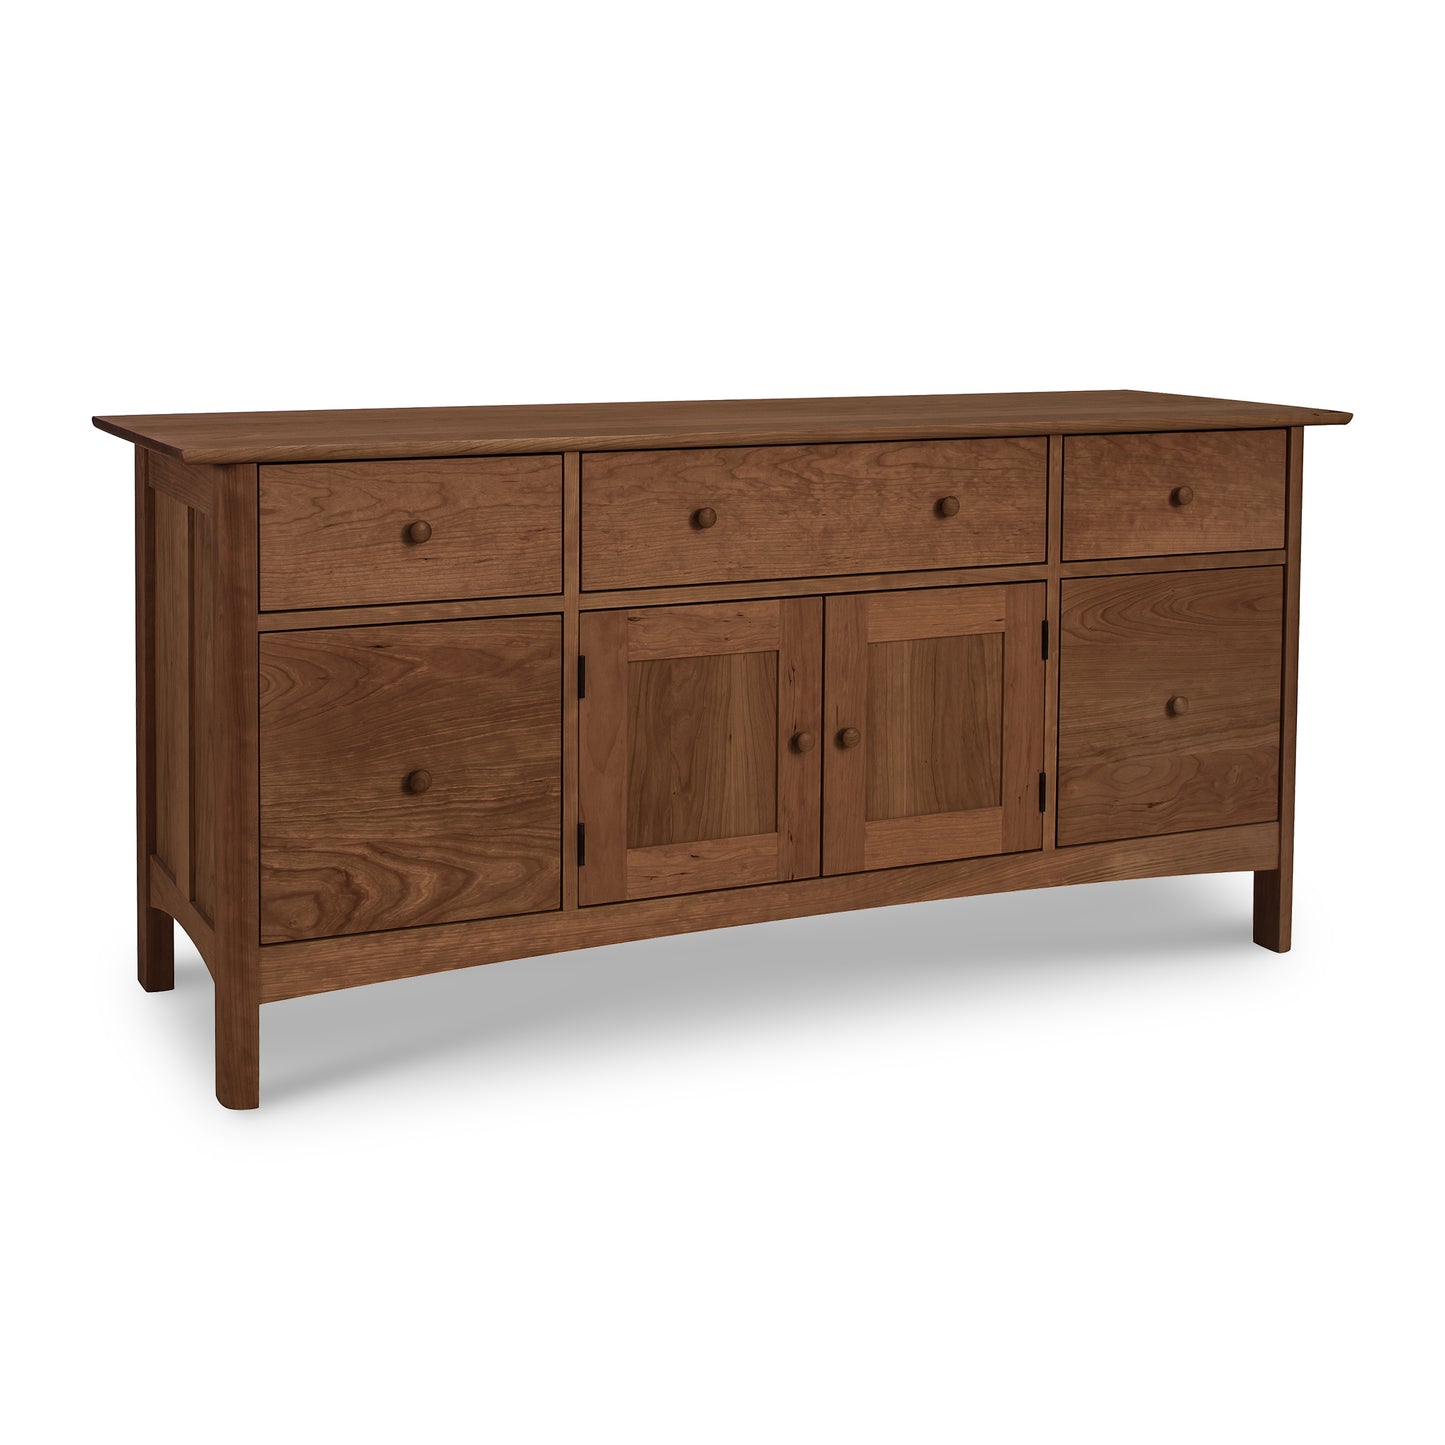 A Vermont Furniture Designs Heartwood Shaker File Credenza, a luxury wooden sideboard with drawers and doors, handcrafted in shaker style.